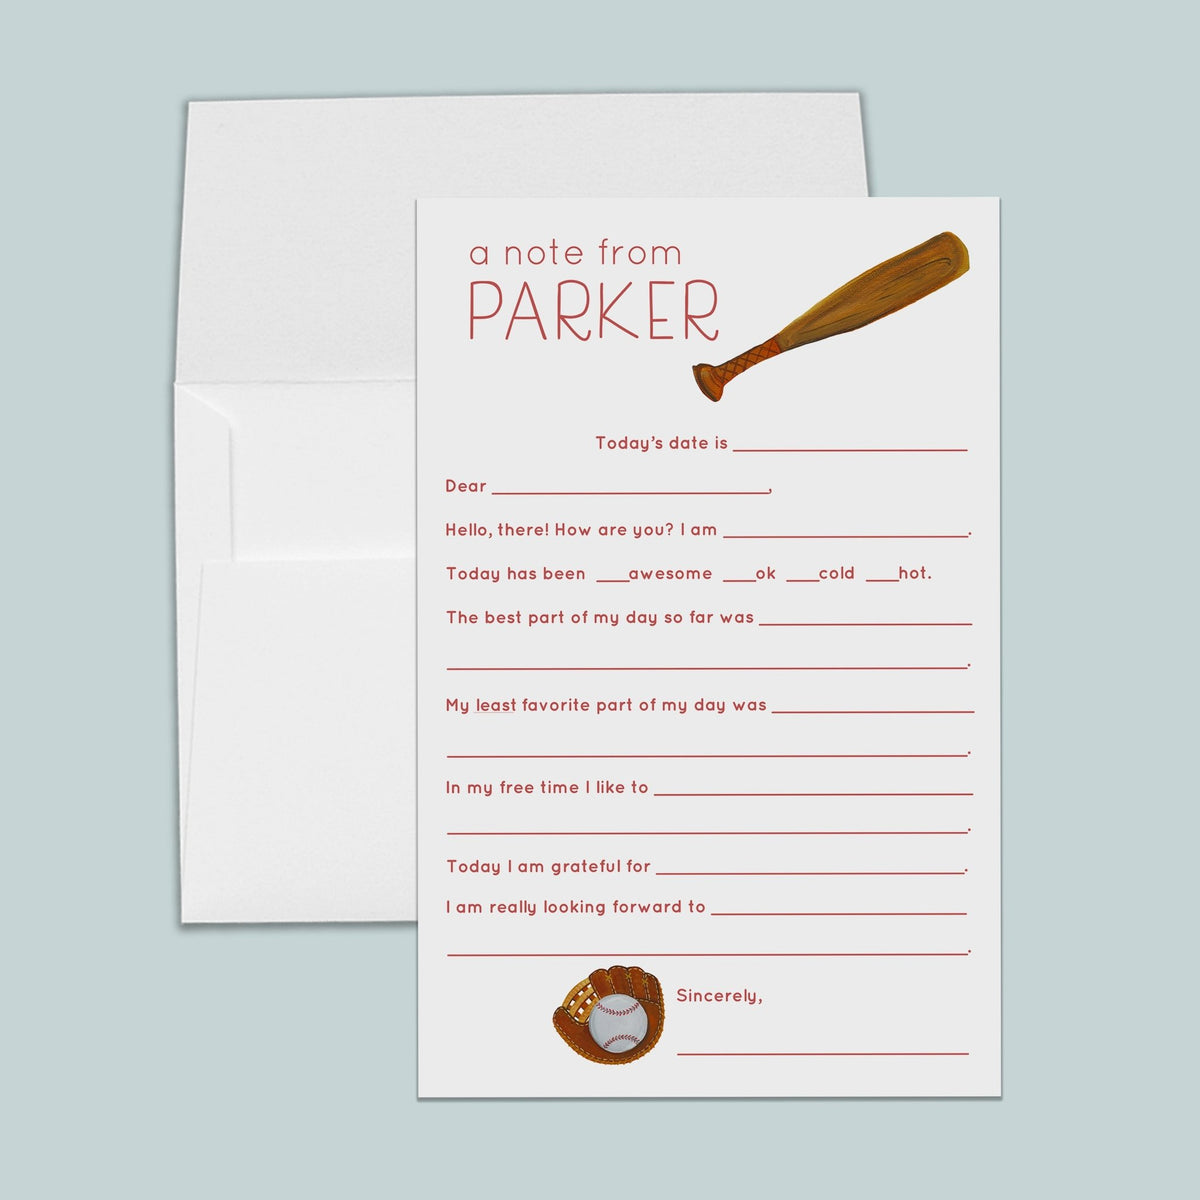 Baseball and Softball - Personalized Fill-in Letter Template - The Note House